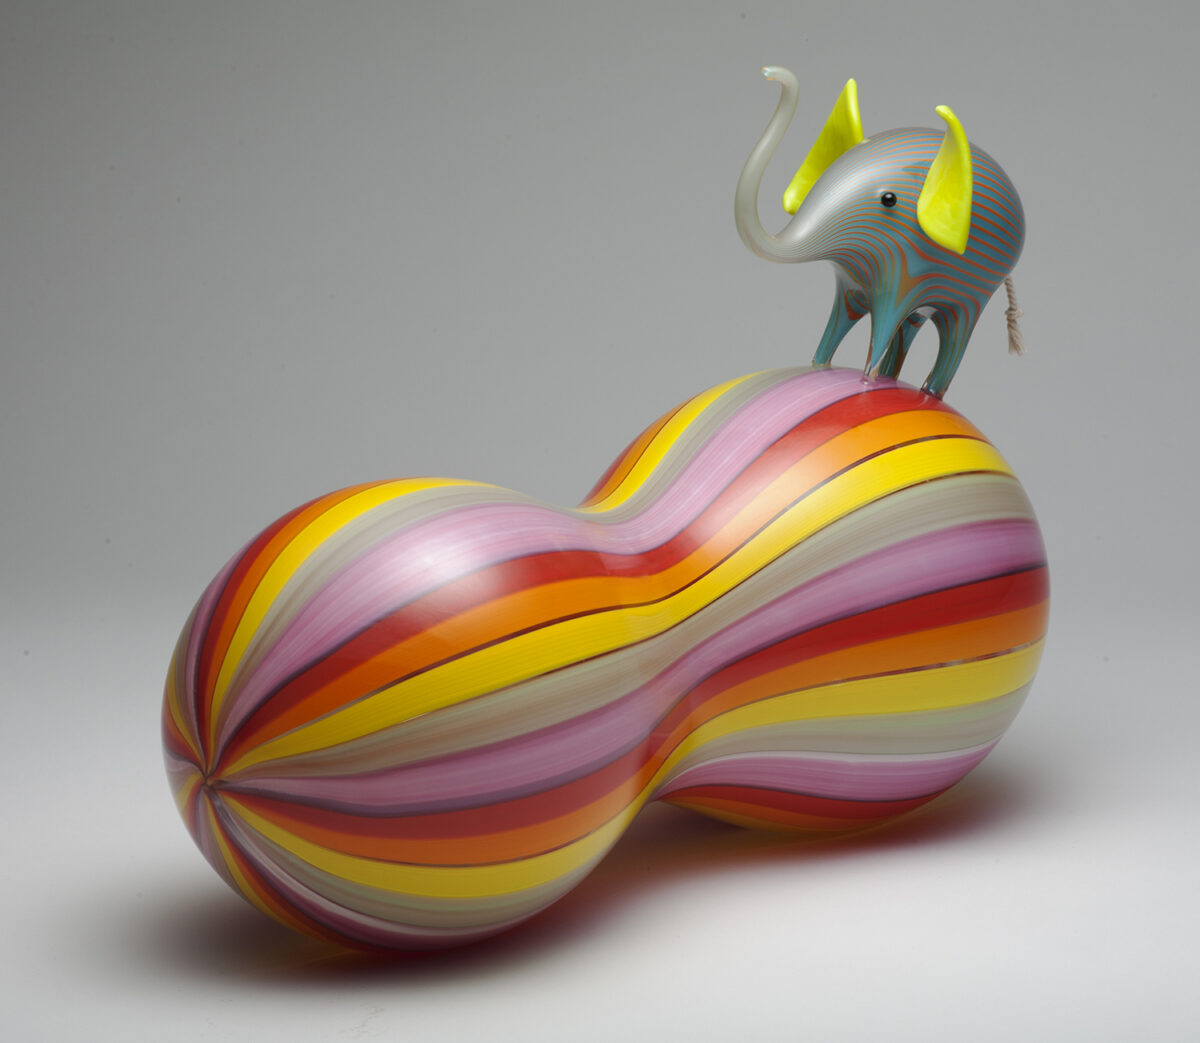 Perihelion Gorgeous Animal Glass Sculptures With Vibrant Colors By Claire Kelly